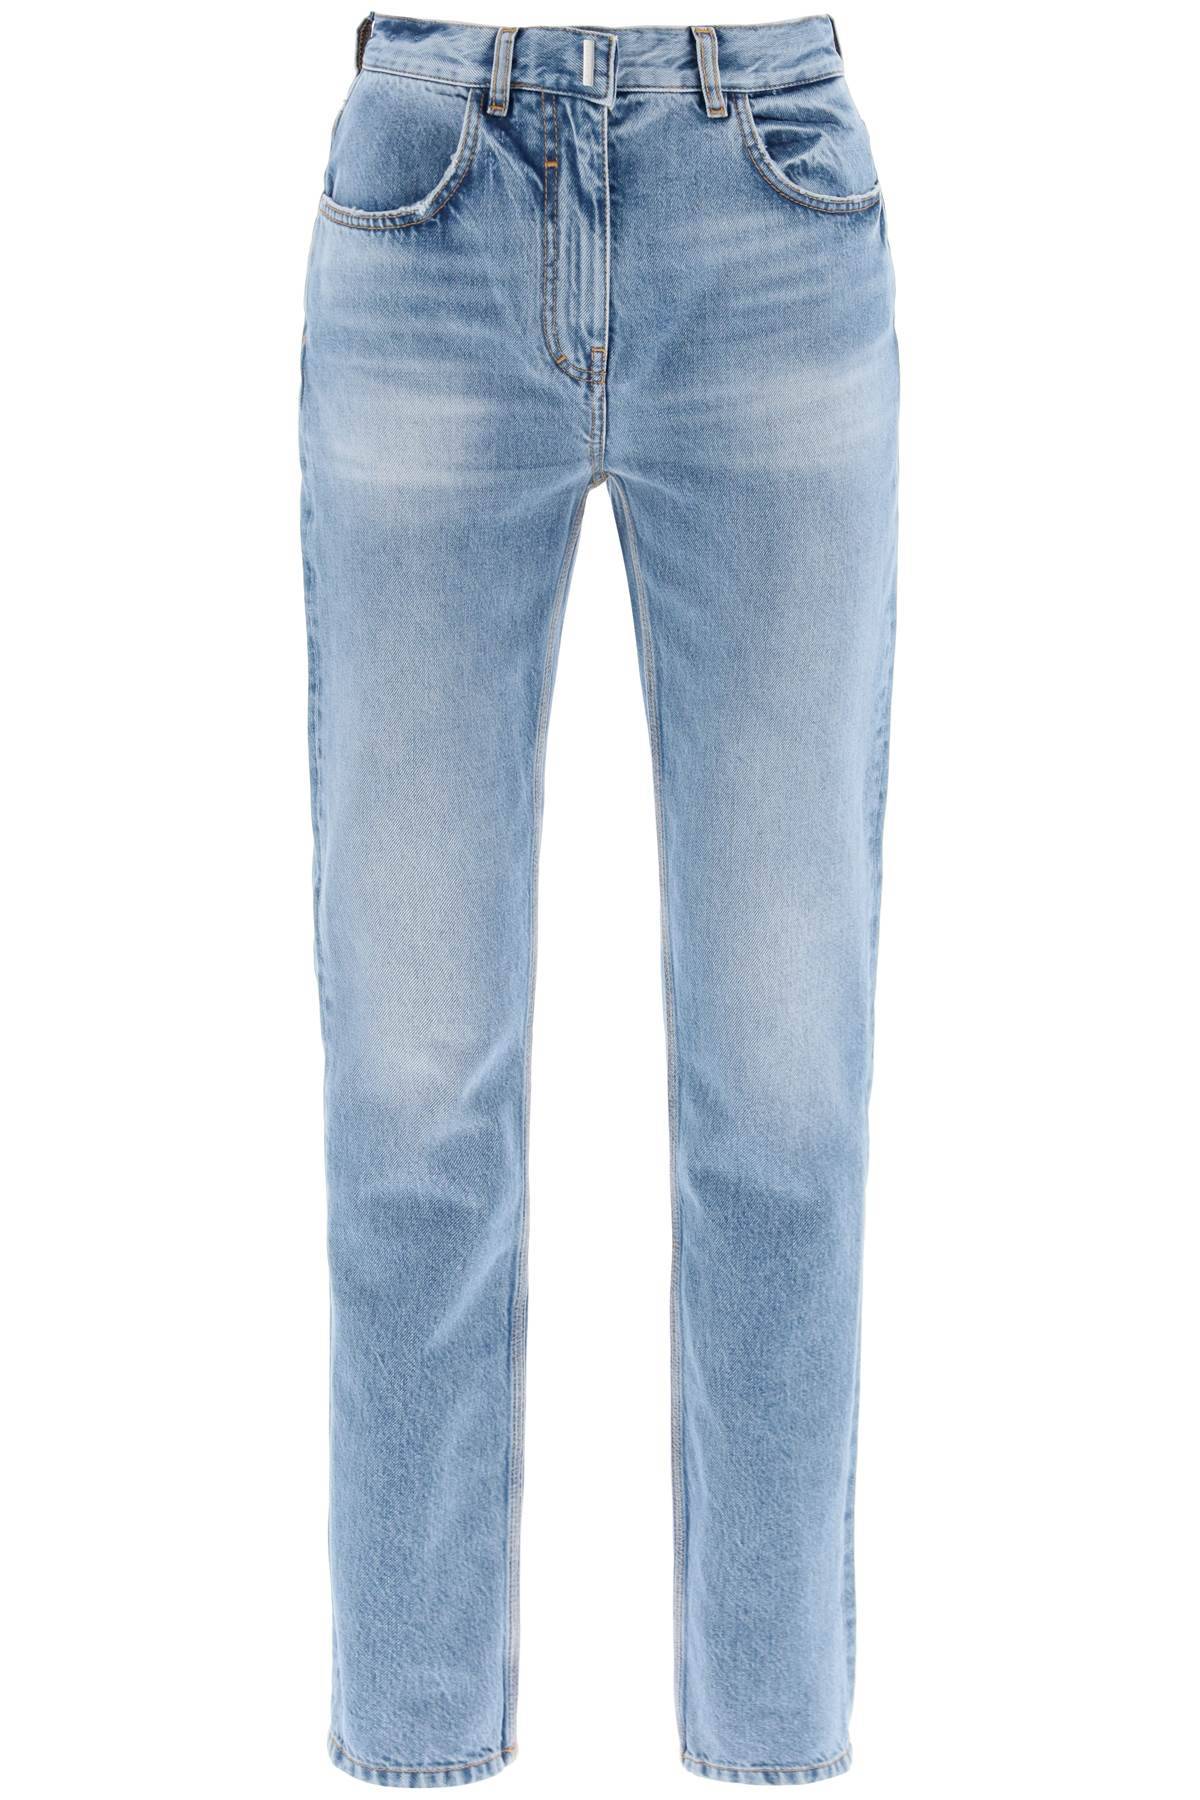 Givenchy Light Wash Cigarette Jeans With Nine Words. In Light Blue